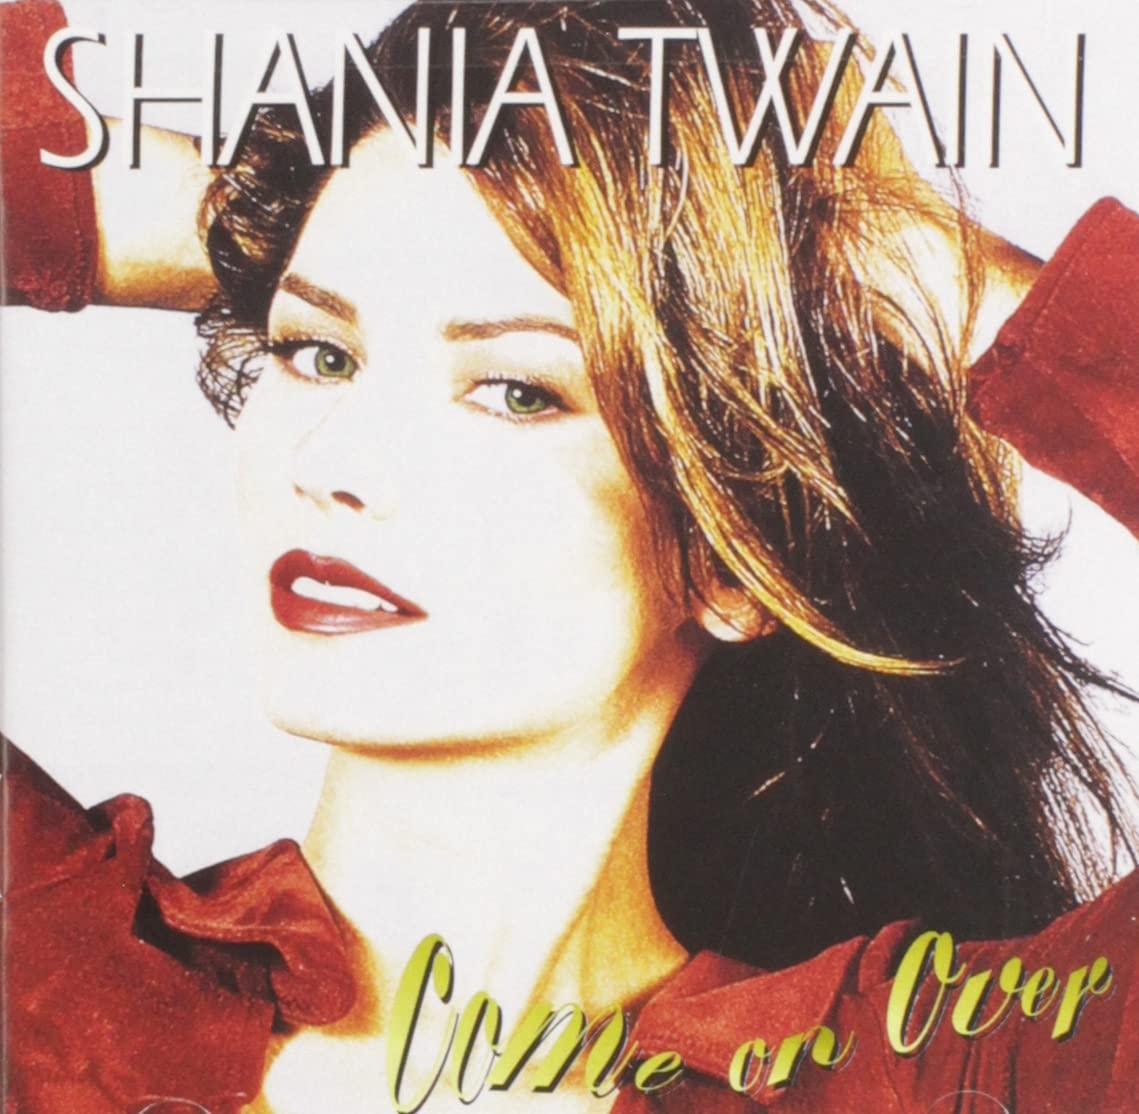 Shania Twain- Come On Over - Darkside Records